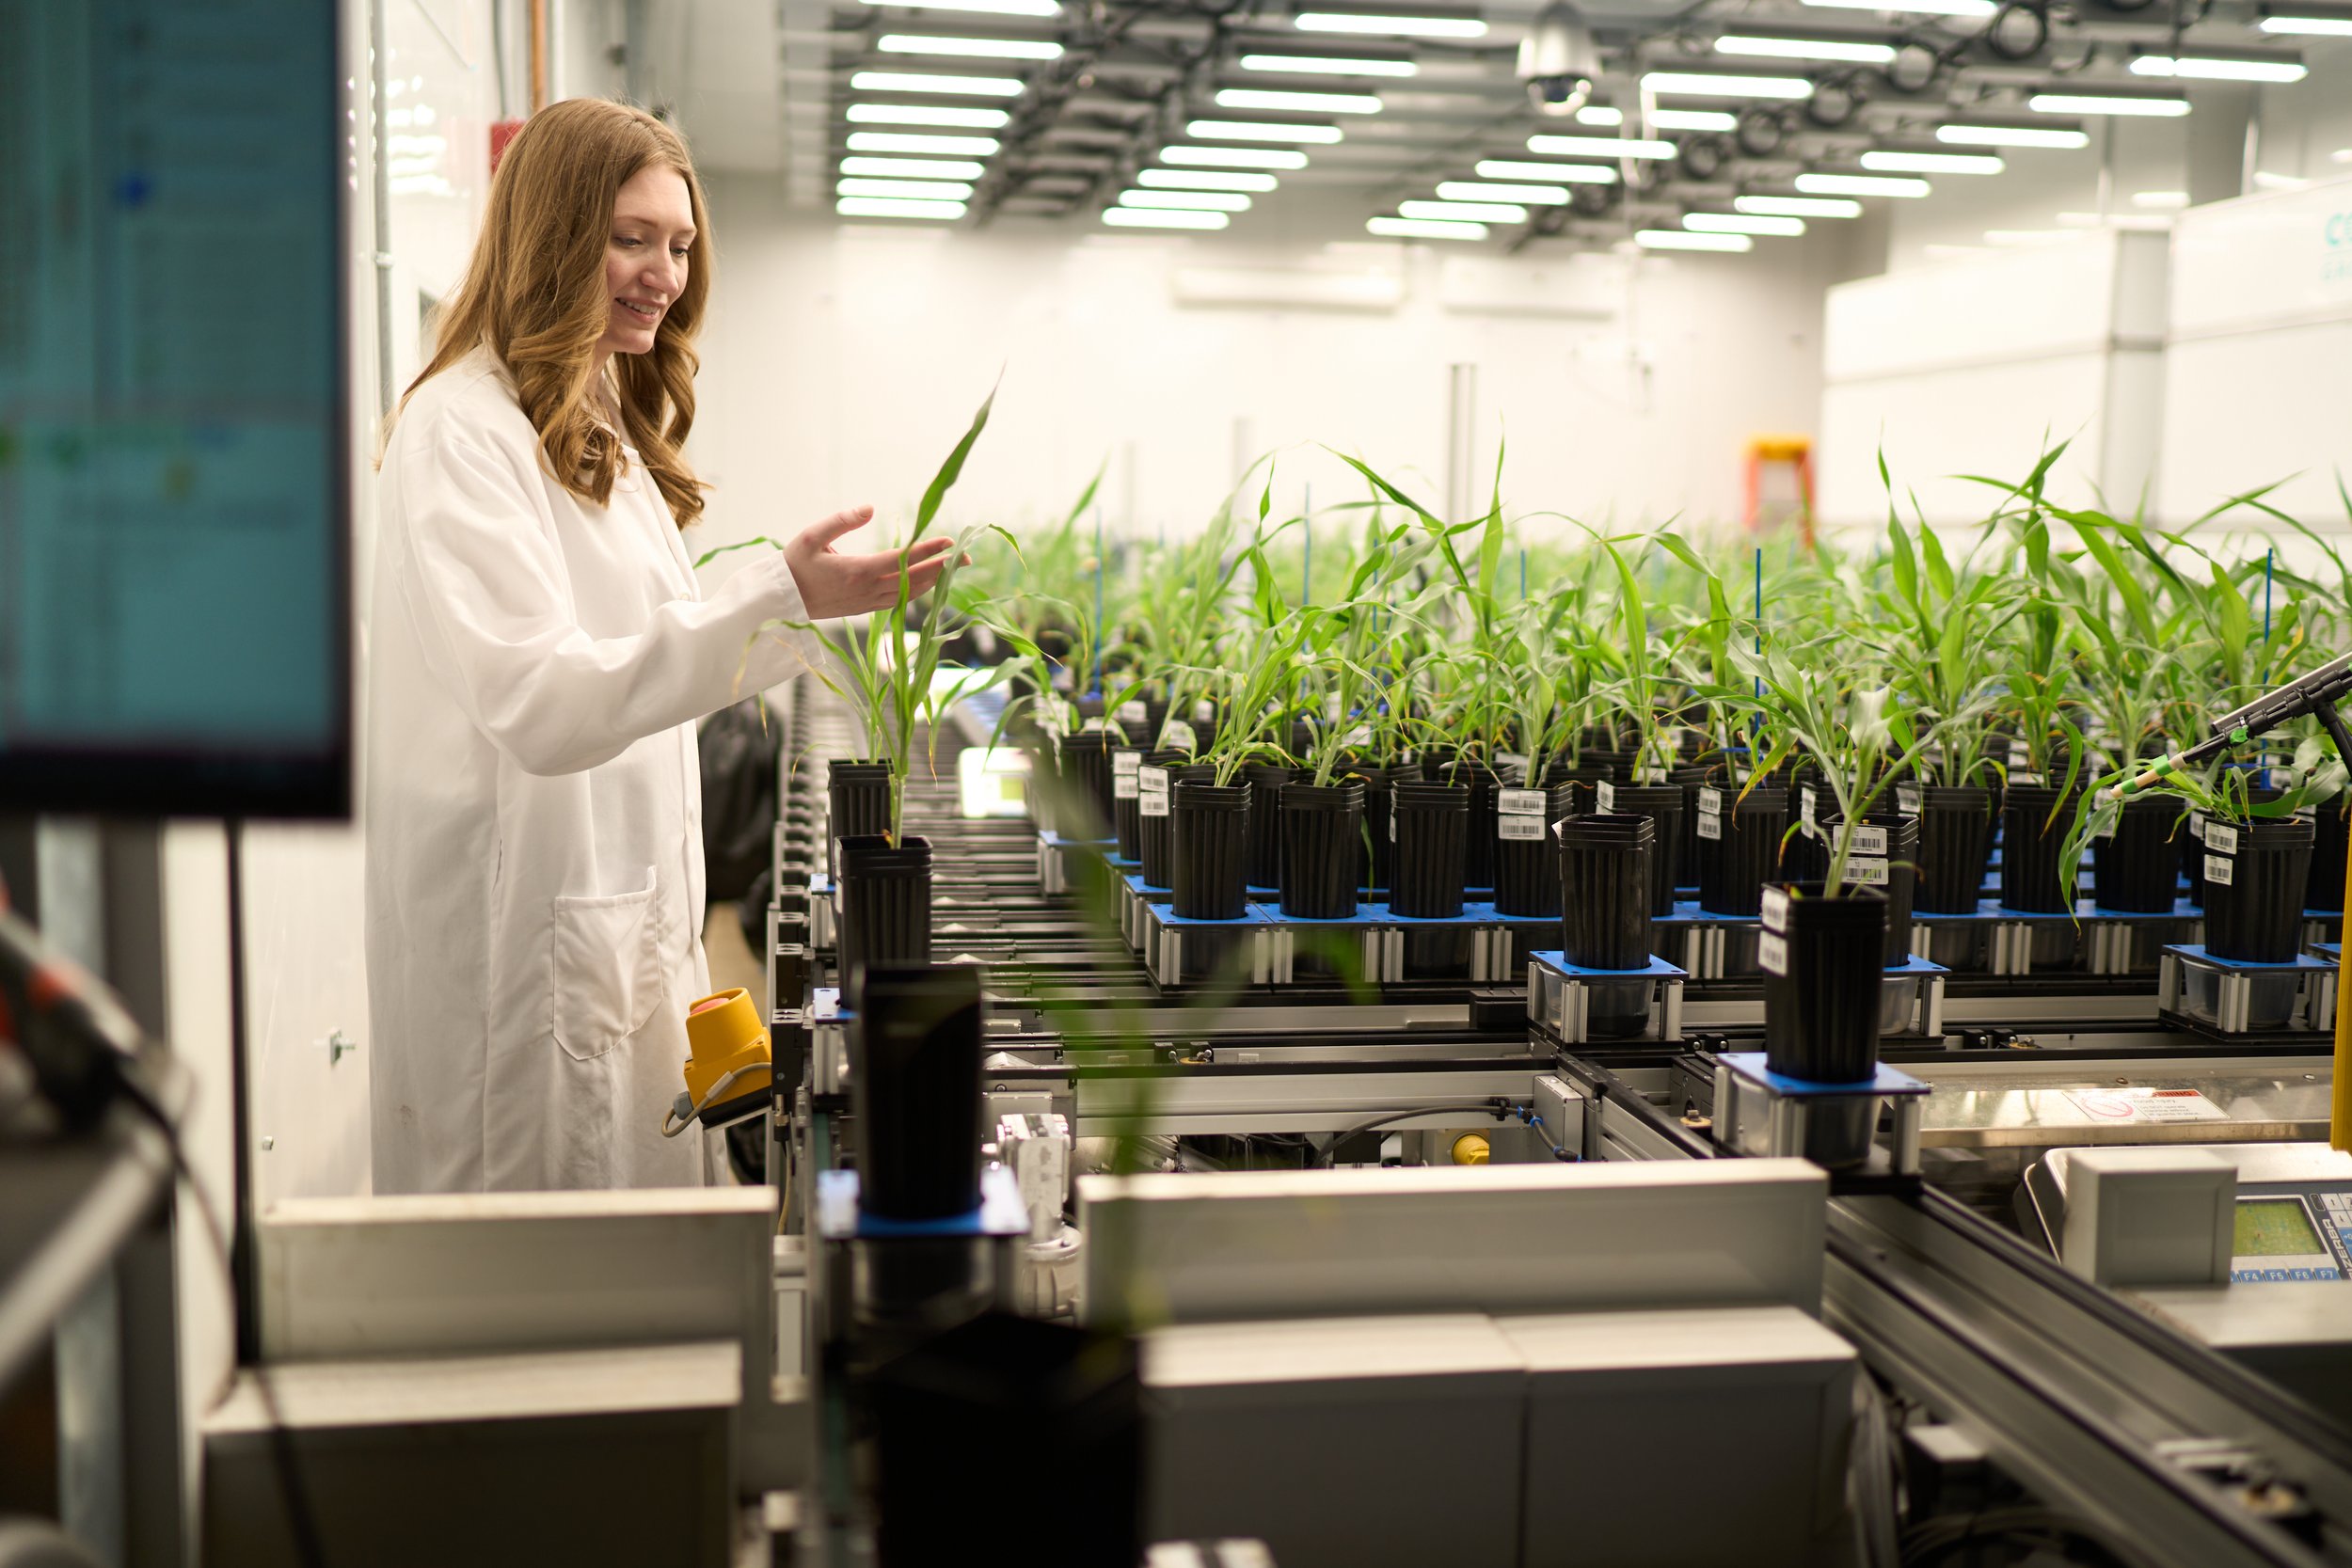  Dr. Murphy examines plants in the high-throughput phenotyping facility at the Donald Danforth Plant Science Center. Photo credit: Donald Danforth Plant Science Center 